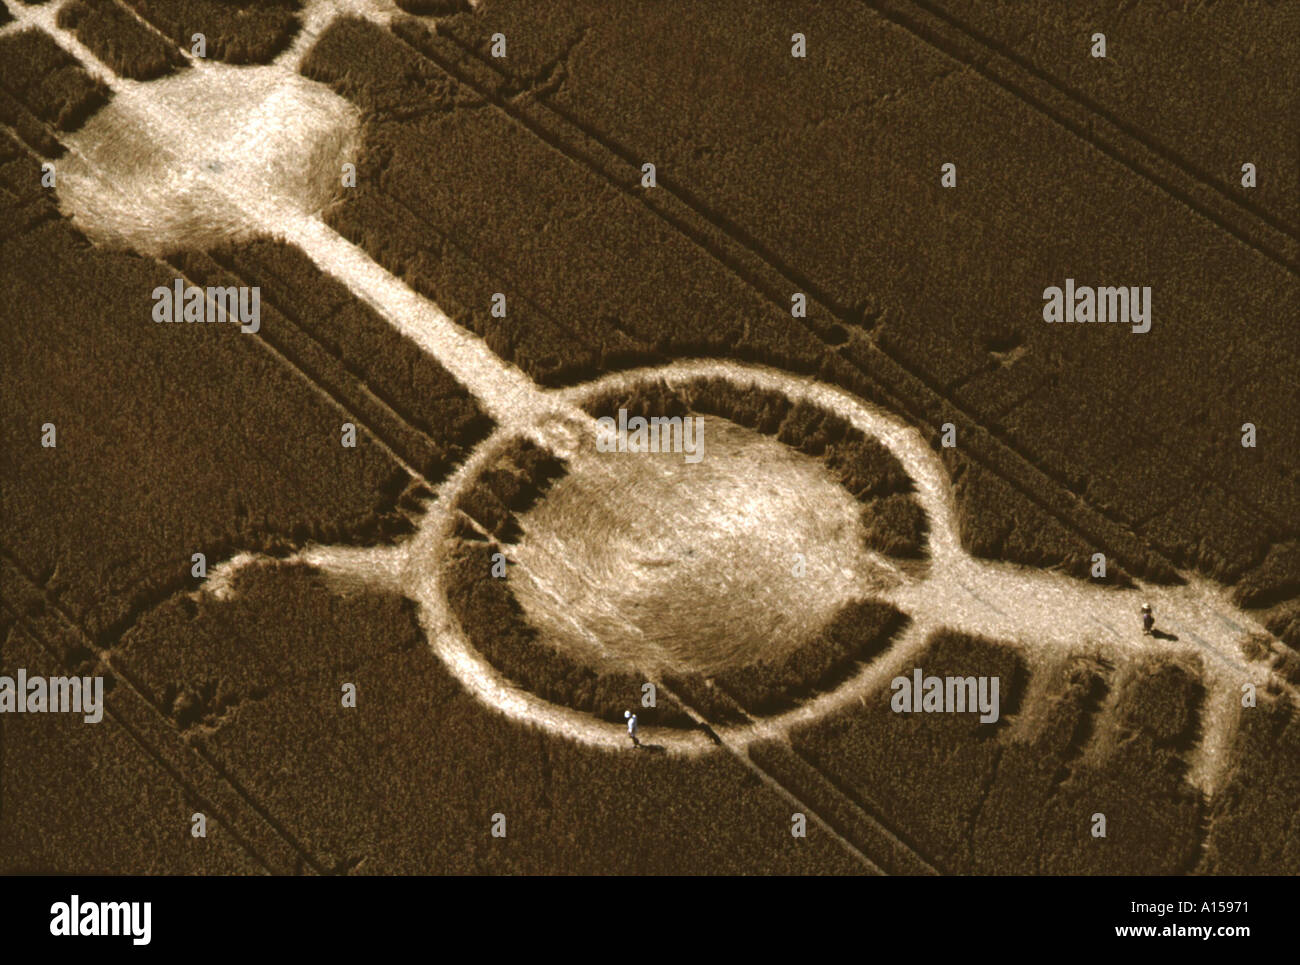 Early example of a crop circle Avon Wiltshire England UK A Woolfitt Stock Photo